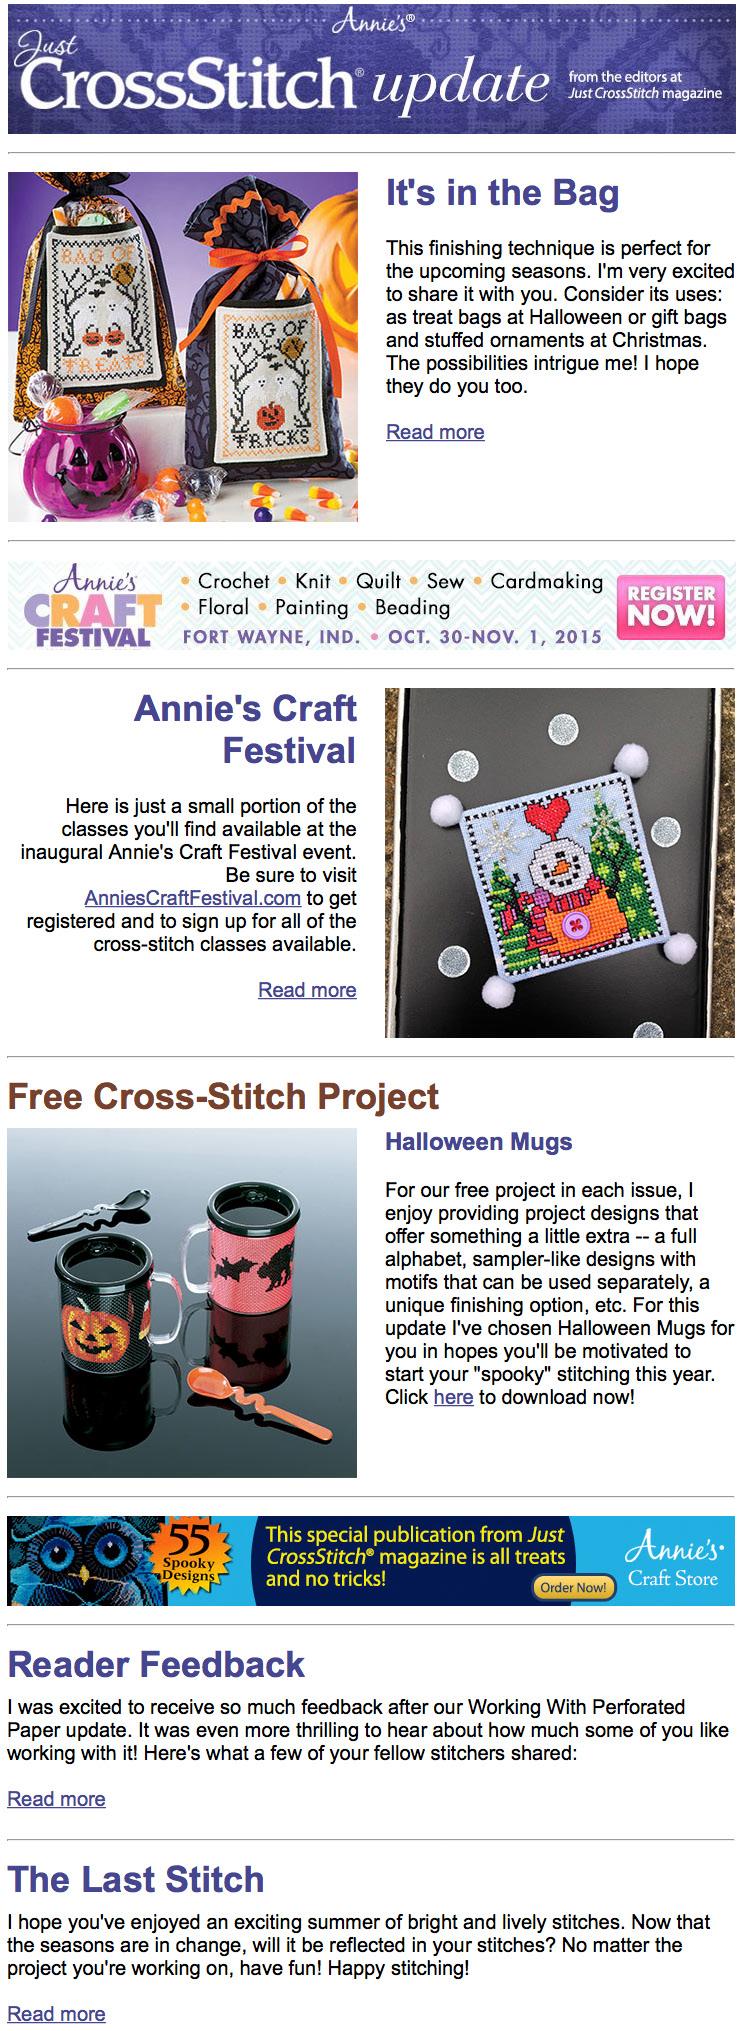 Home to our online community where cross stitchers find Pillow inspiration and ideas!